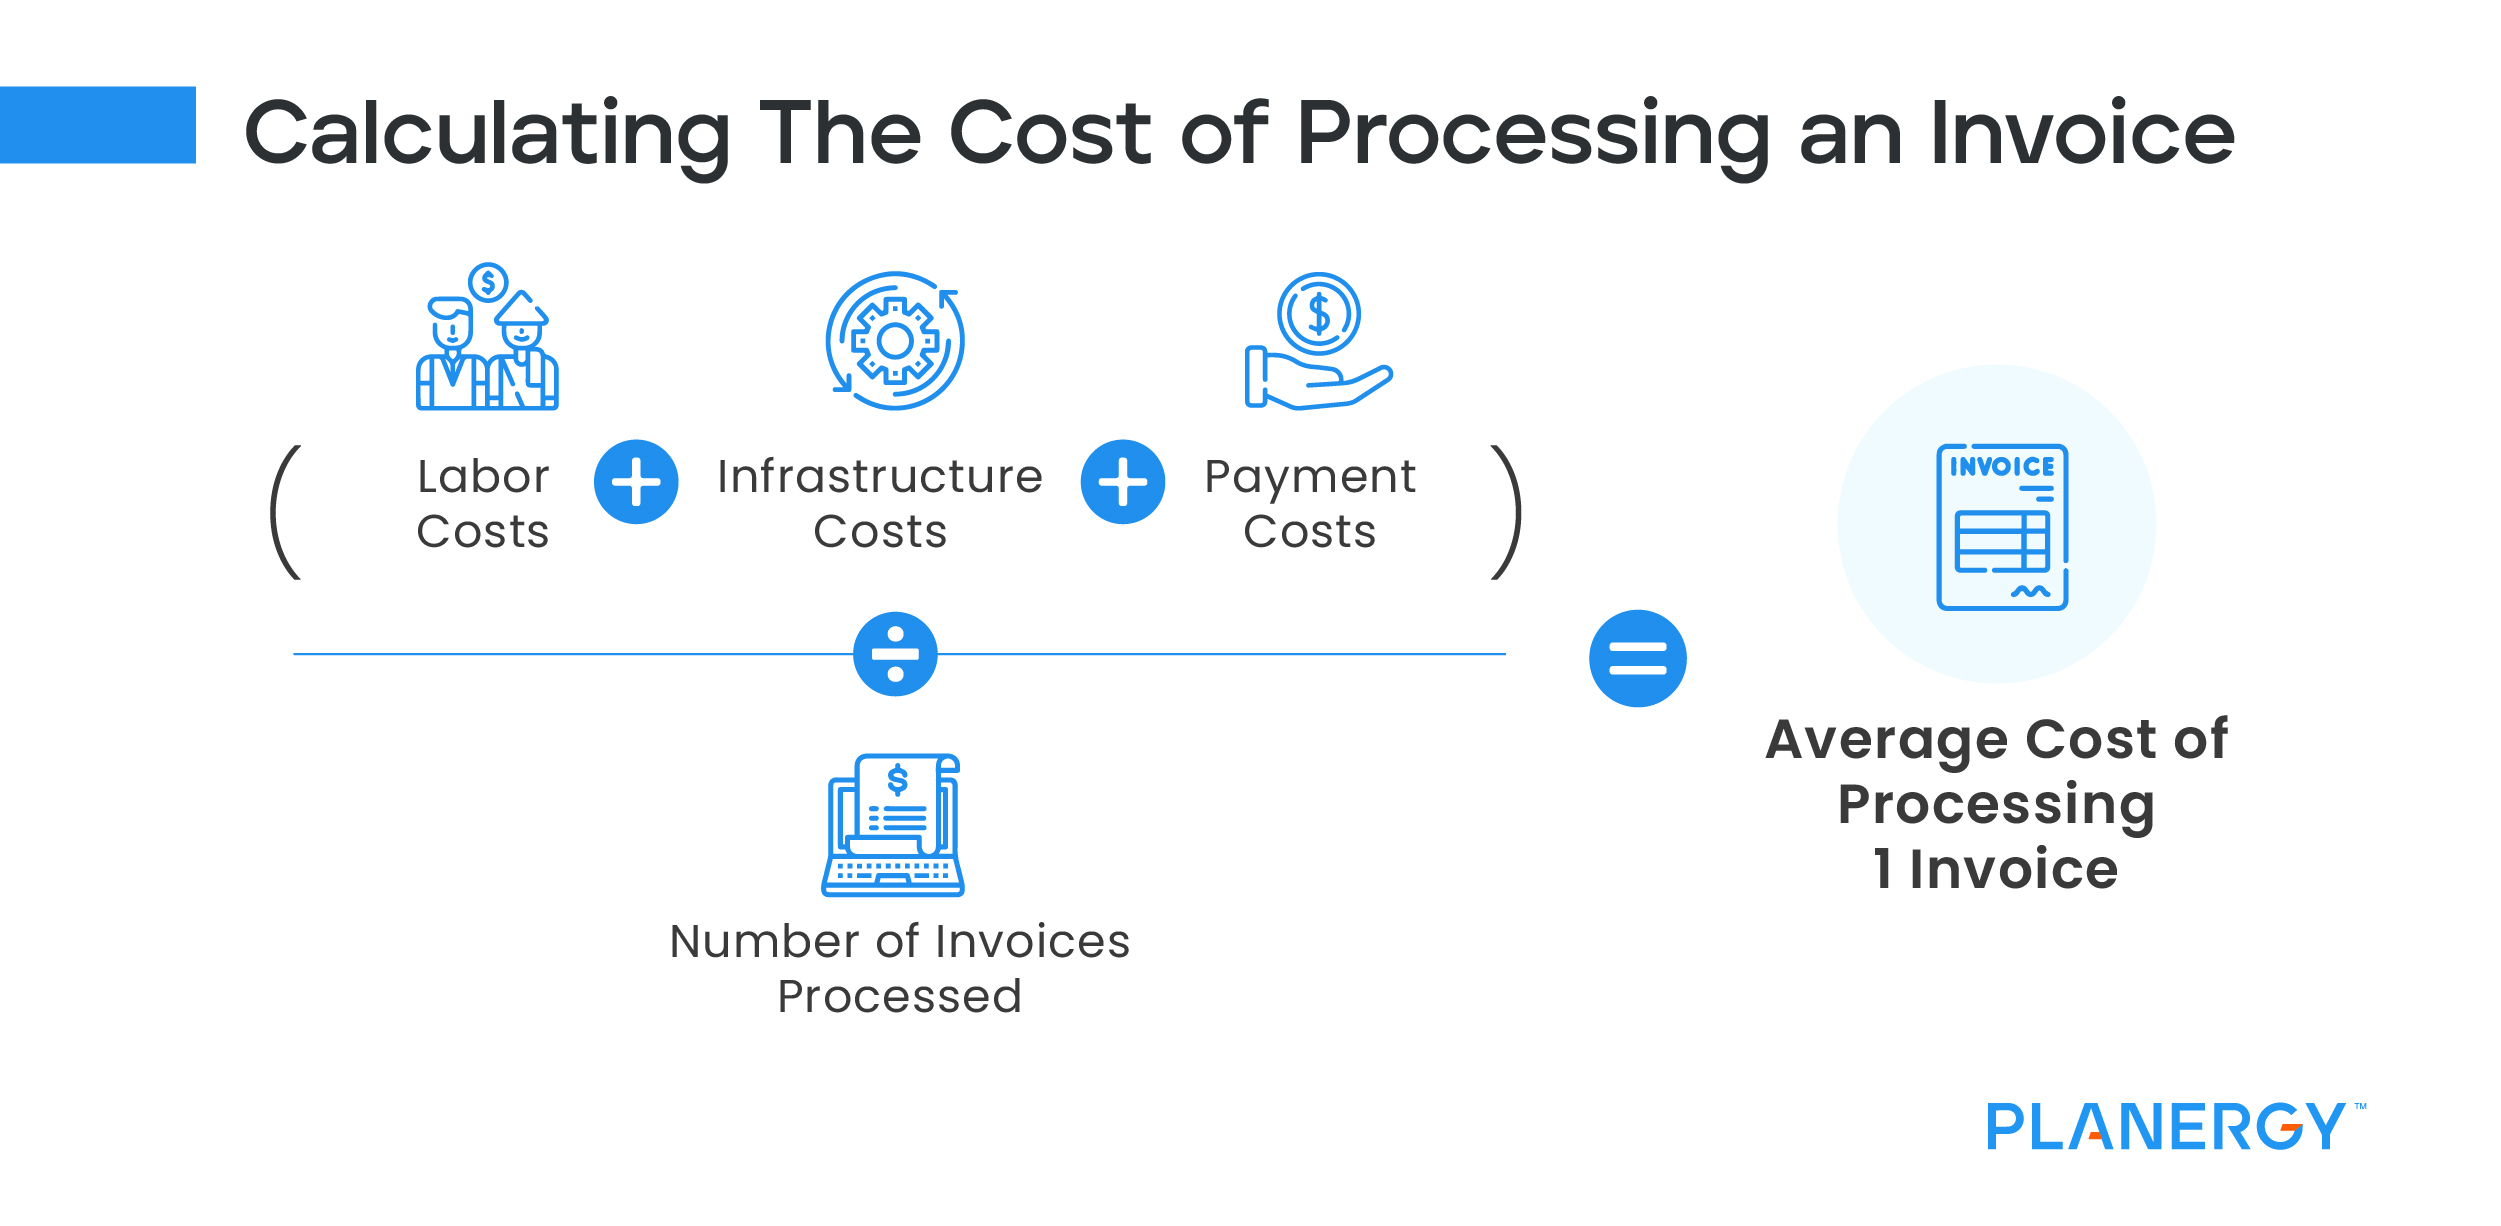 Calculating the Cost of Processing an Invoice